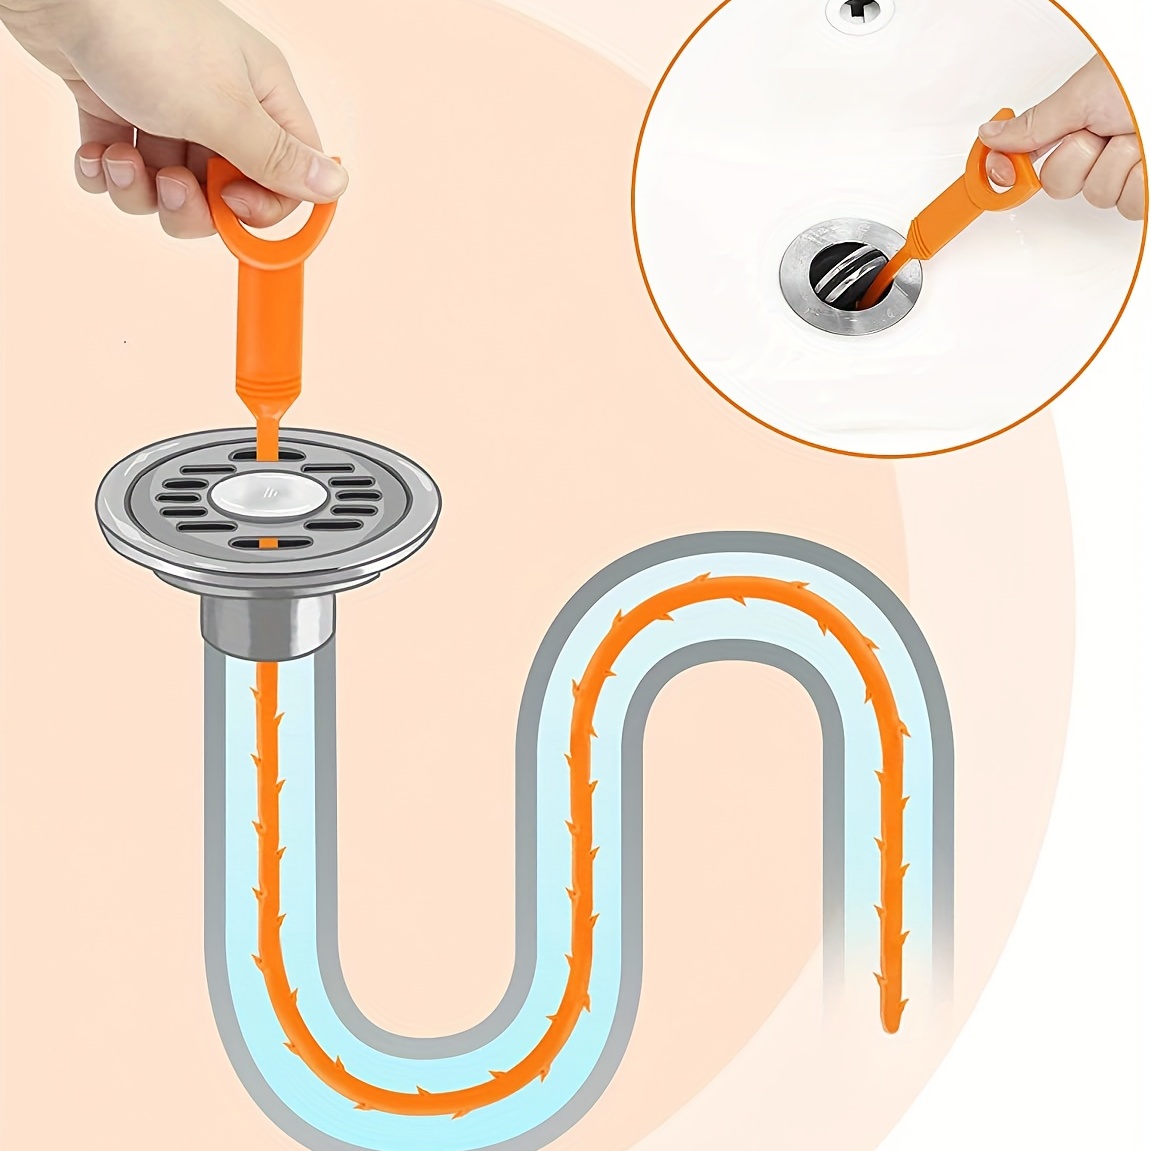 LikeCoo Drain Snake Hair Clog Remover - 6 PCS 25'' Hair Unclog Auger,  Plastic Sink Snake Drain Hair Removal Tool for Clogged Drain, Shower, Pipe